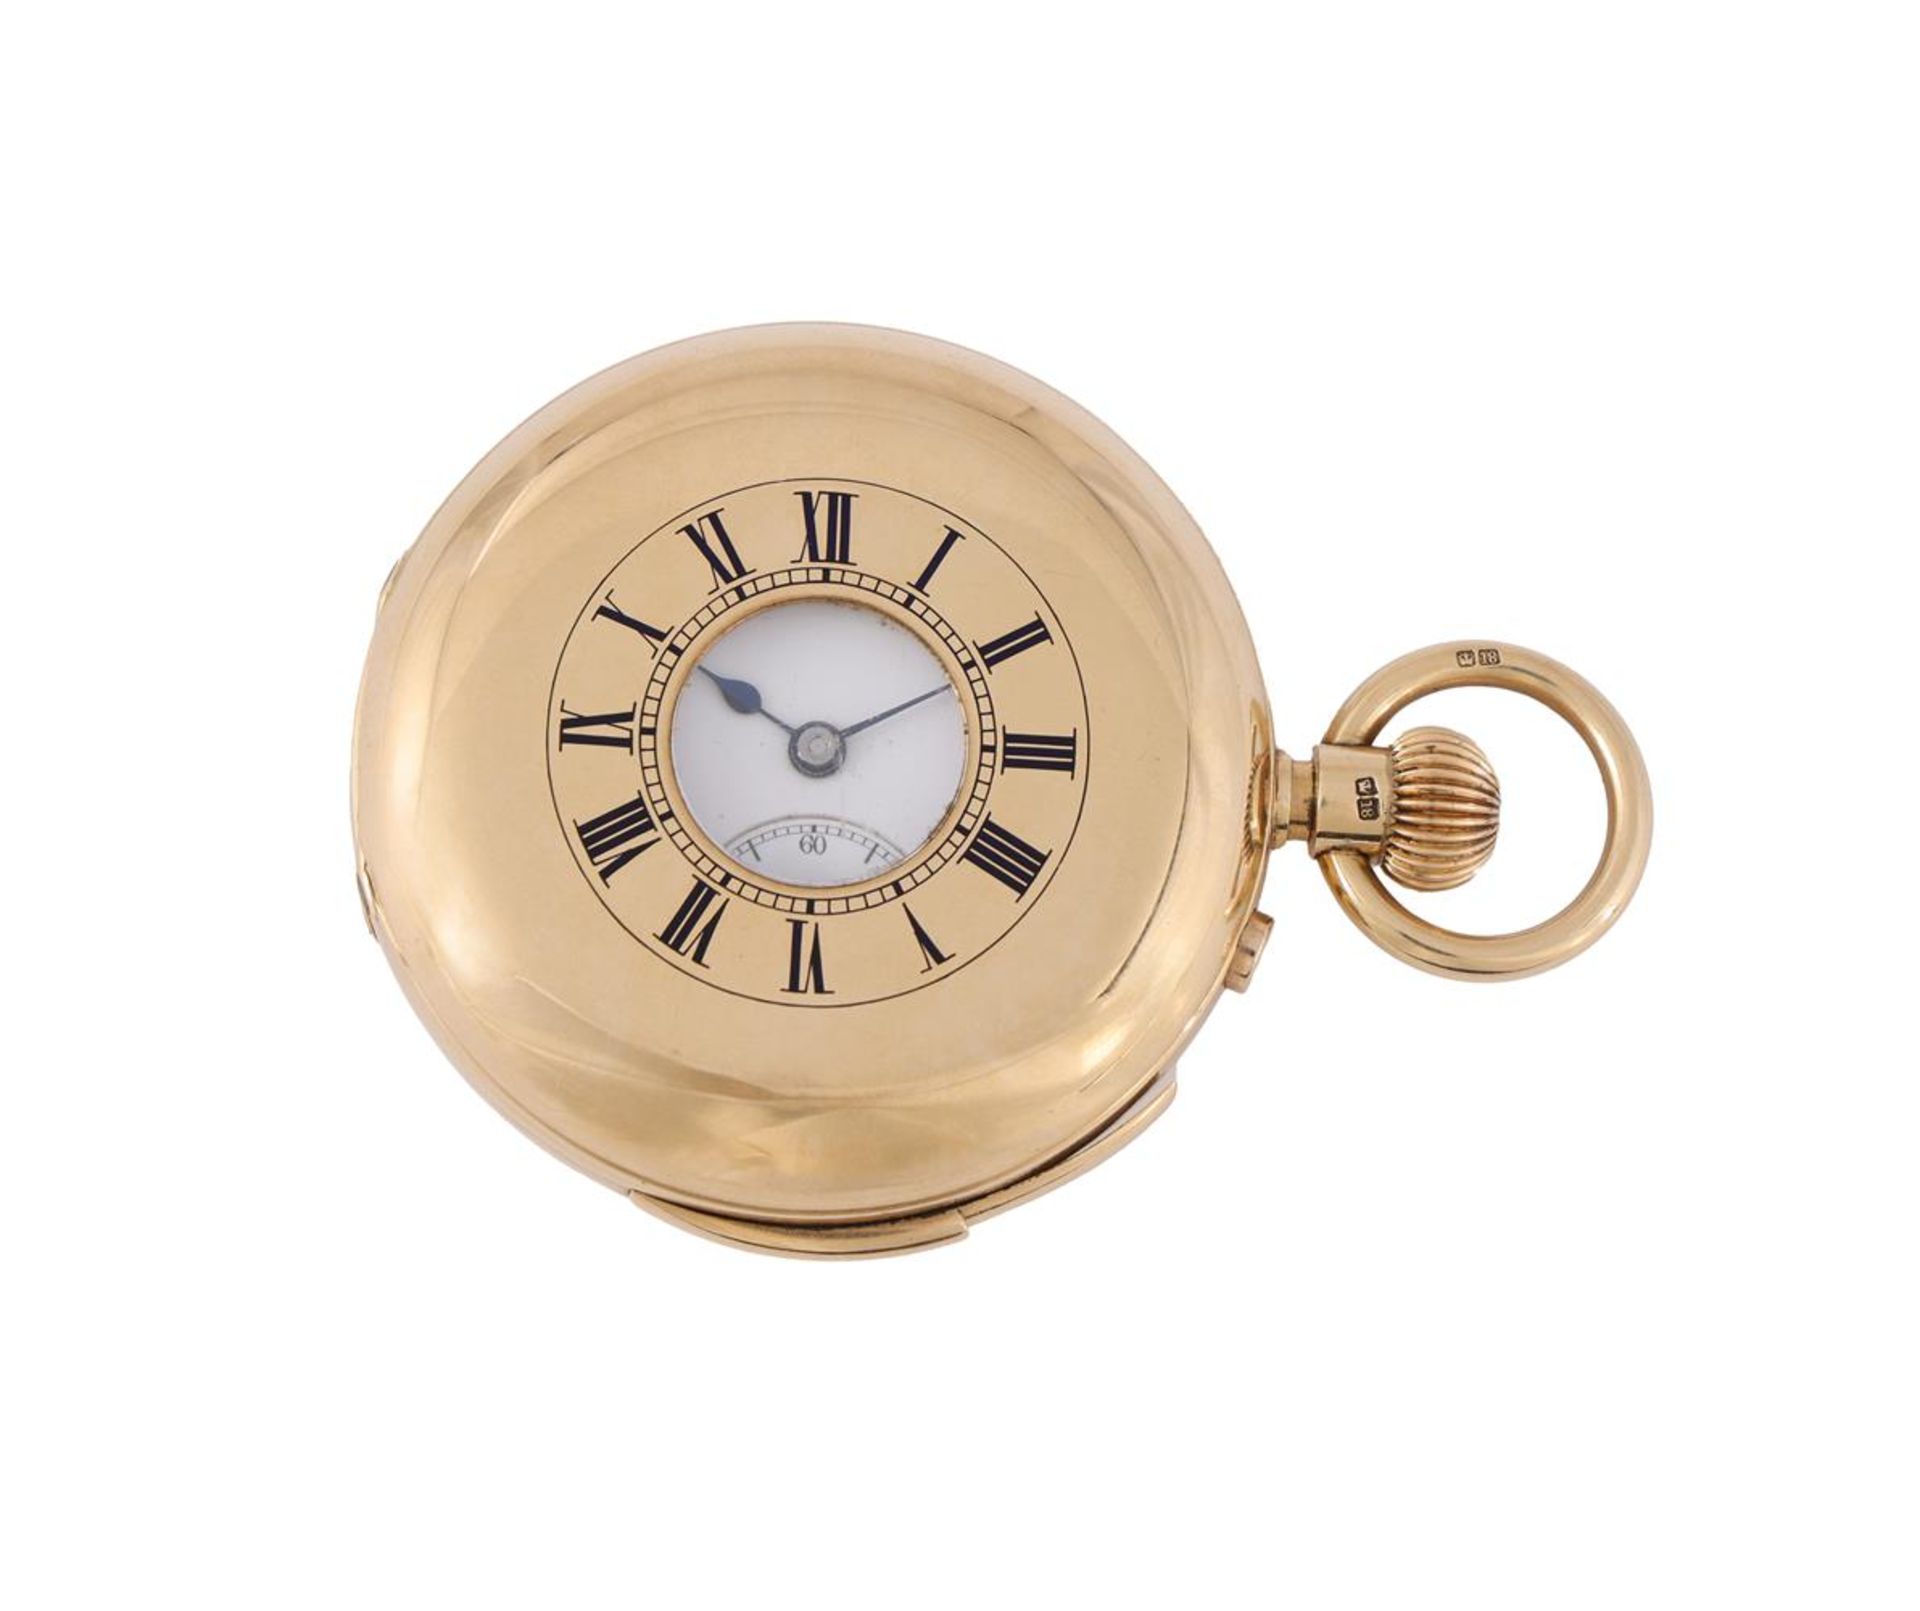 UNSIGNED, AN 18 CARAT GOLD KEYLESS WIND MINUTE REPEATER HALF HUNTER POCKET WATCH